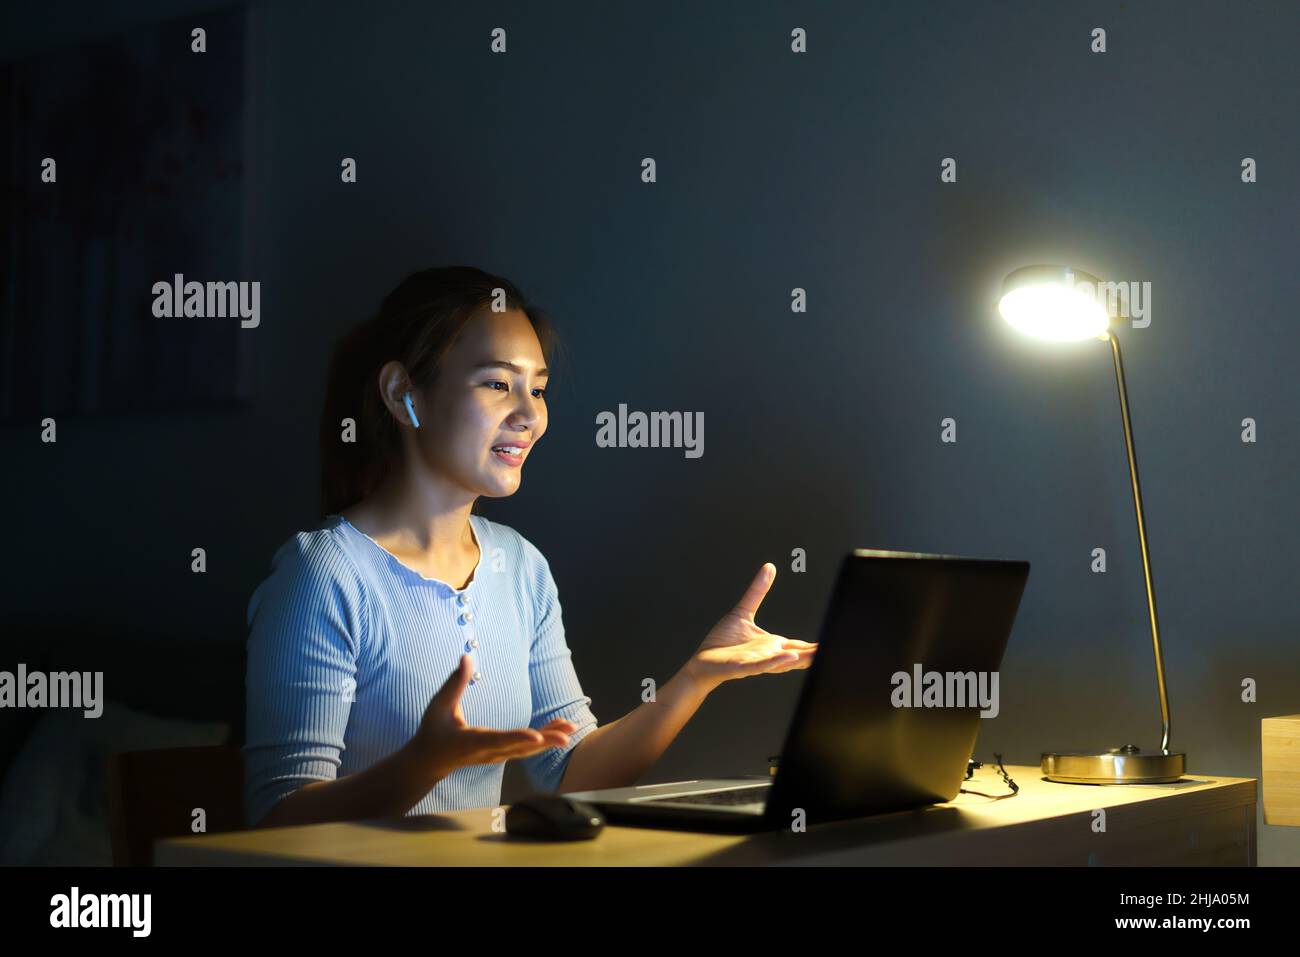 Asian woman work at home are sitting at work with colleagues or managers via video call at night at home. Stock Photo